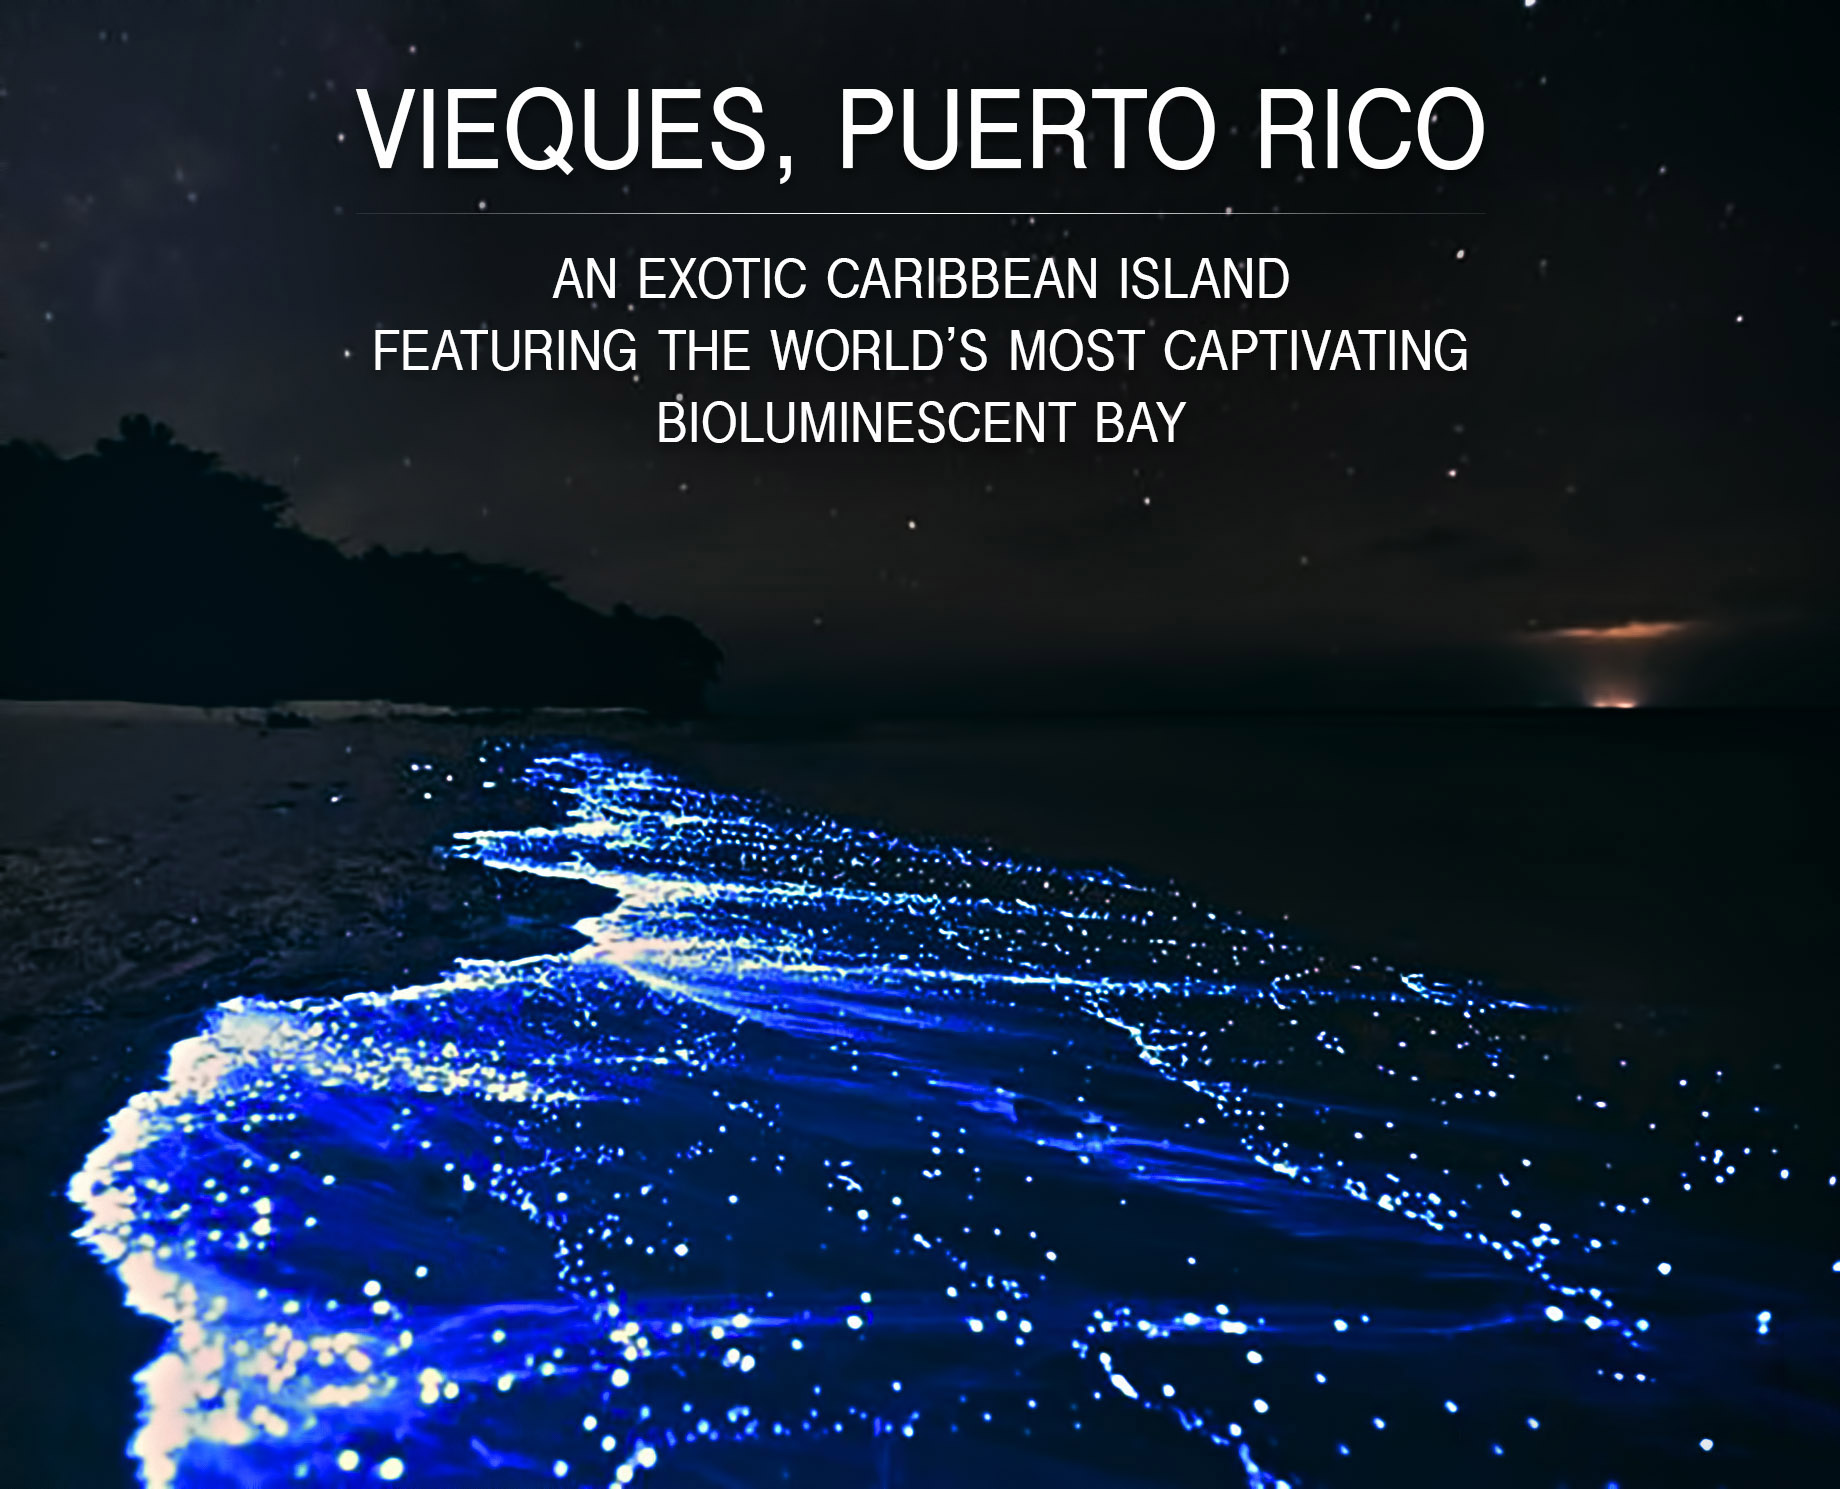 Vieques, Puerto Rico - An Exotic Caribbean Island Featuring the World’s Most Captivating Bioluminescent Bay